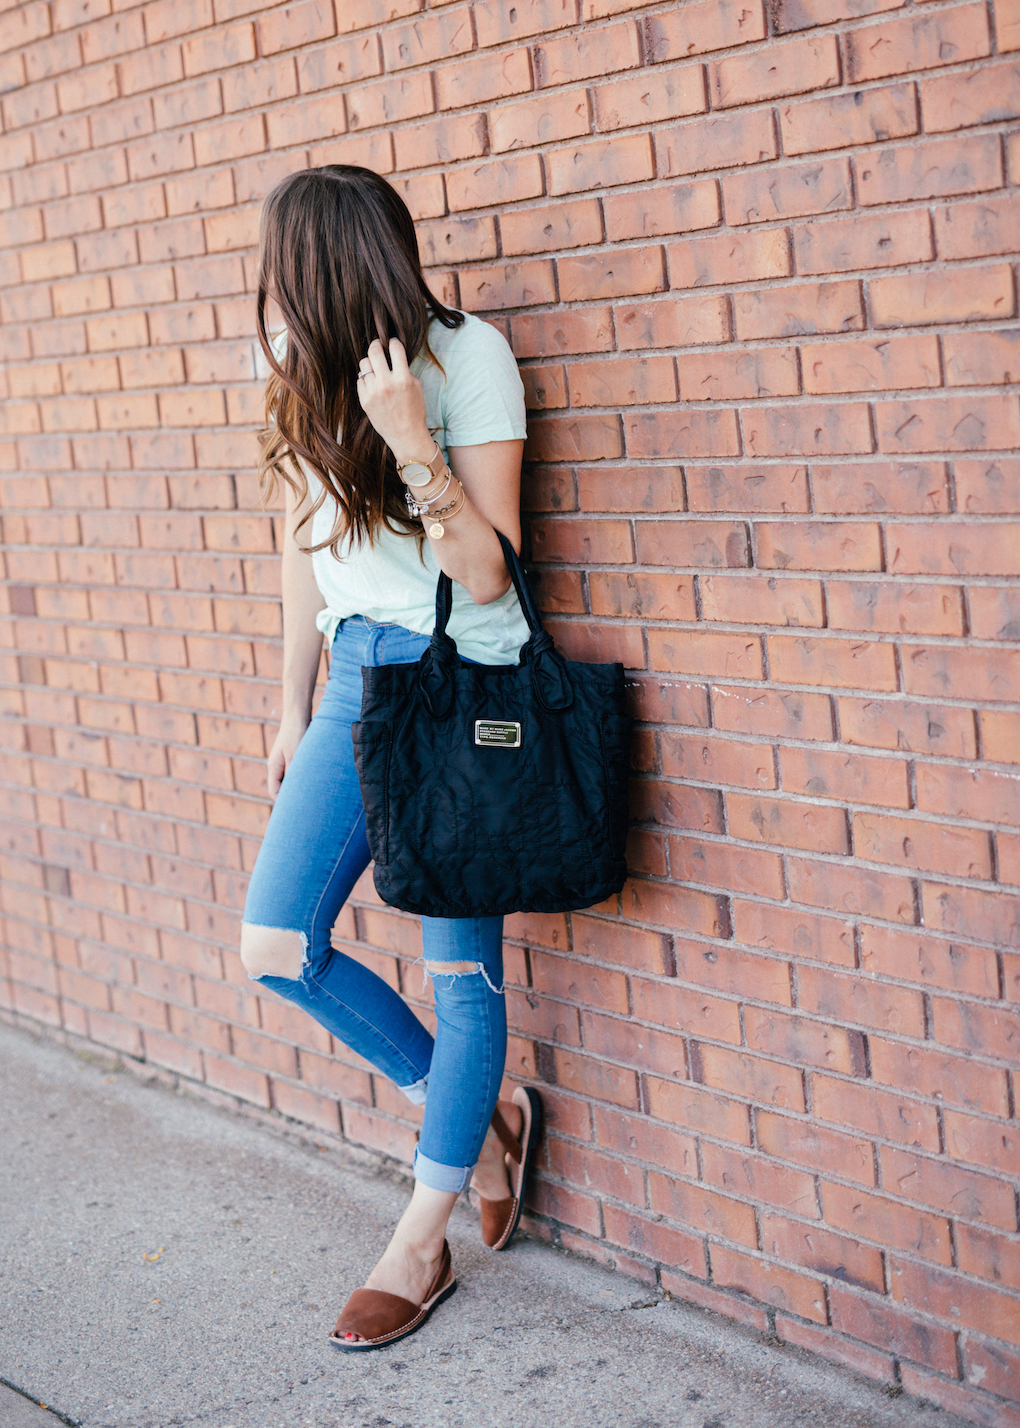 Girl with long brown curled hair wearing distressed skinny jeans, mint madewell tee, marc jacobs bag, and PONS shoes